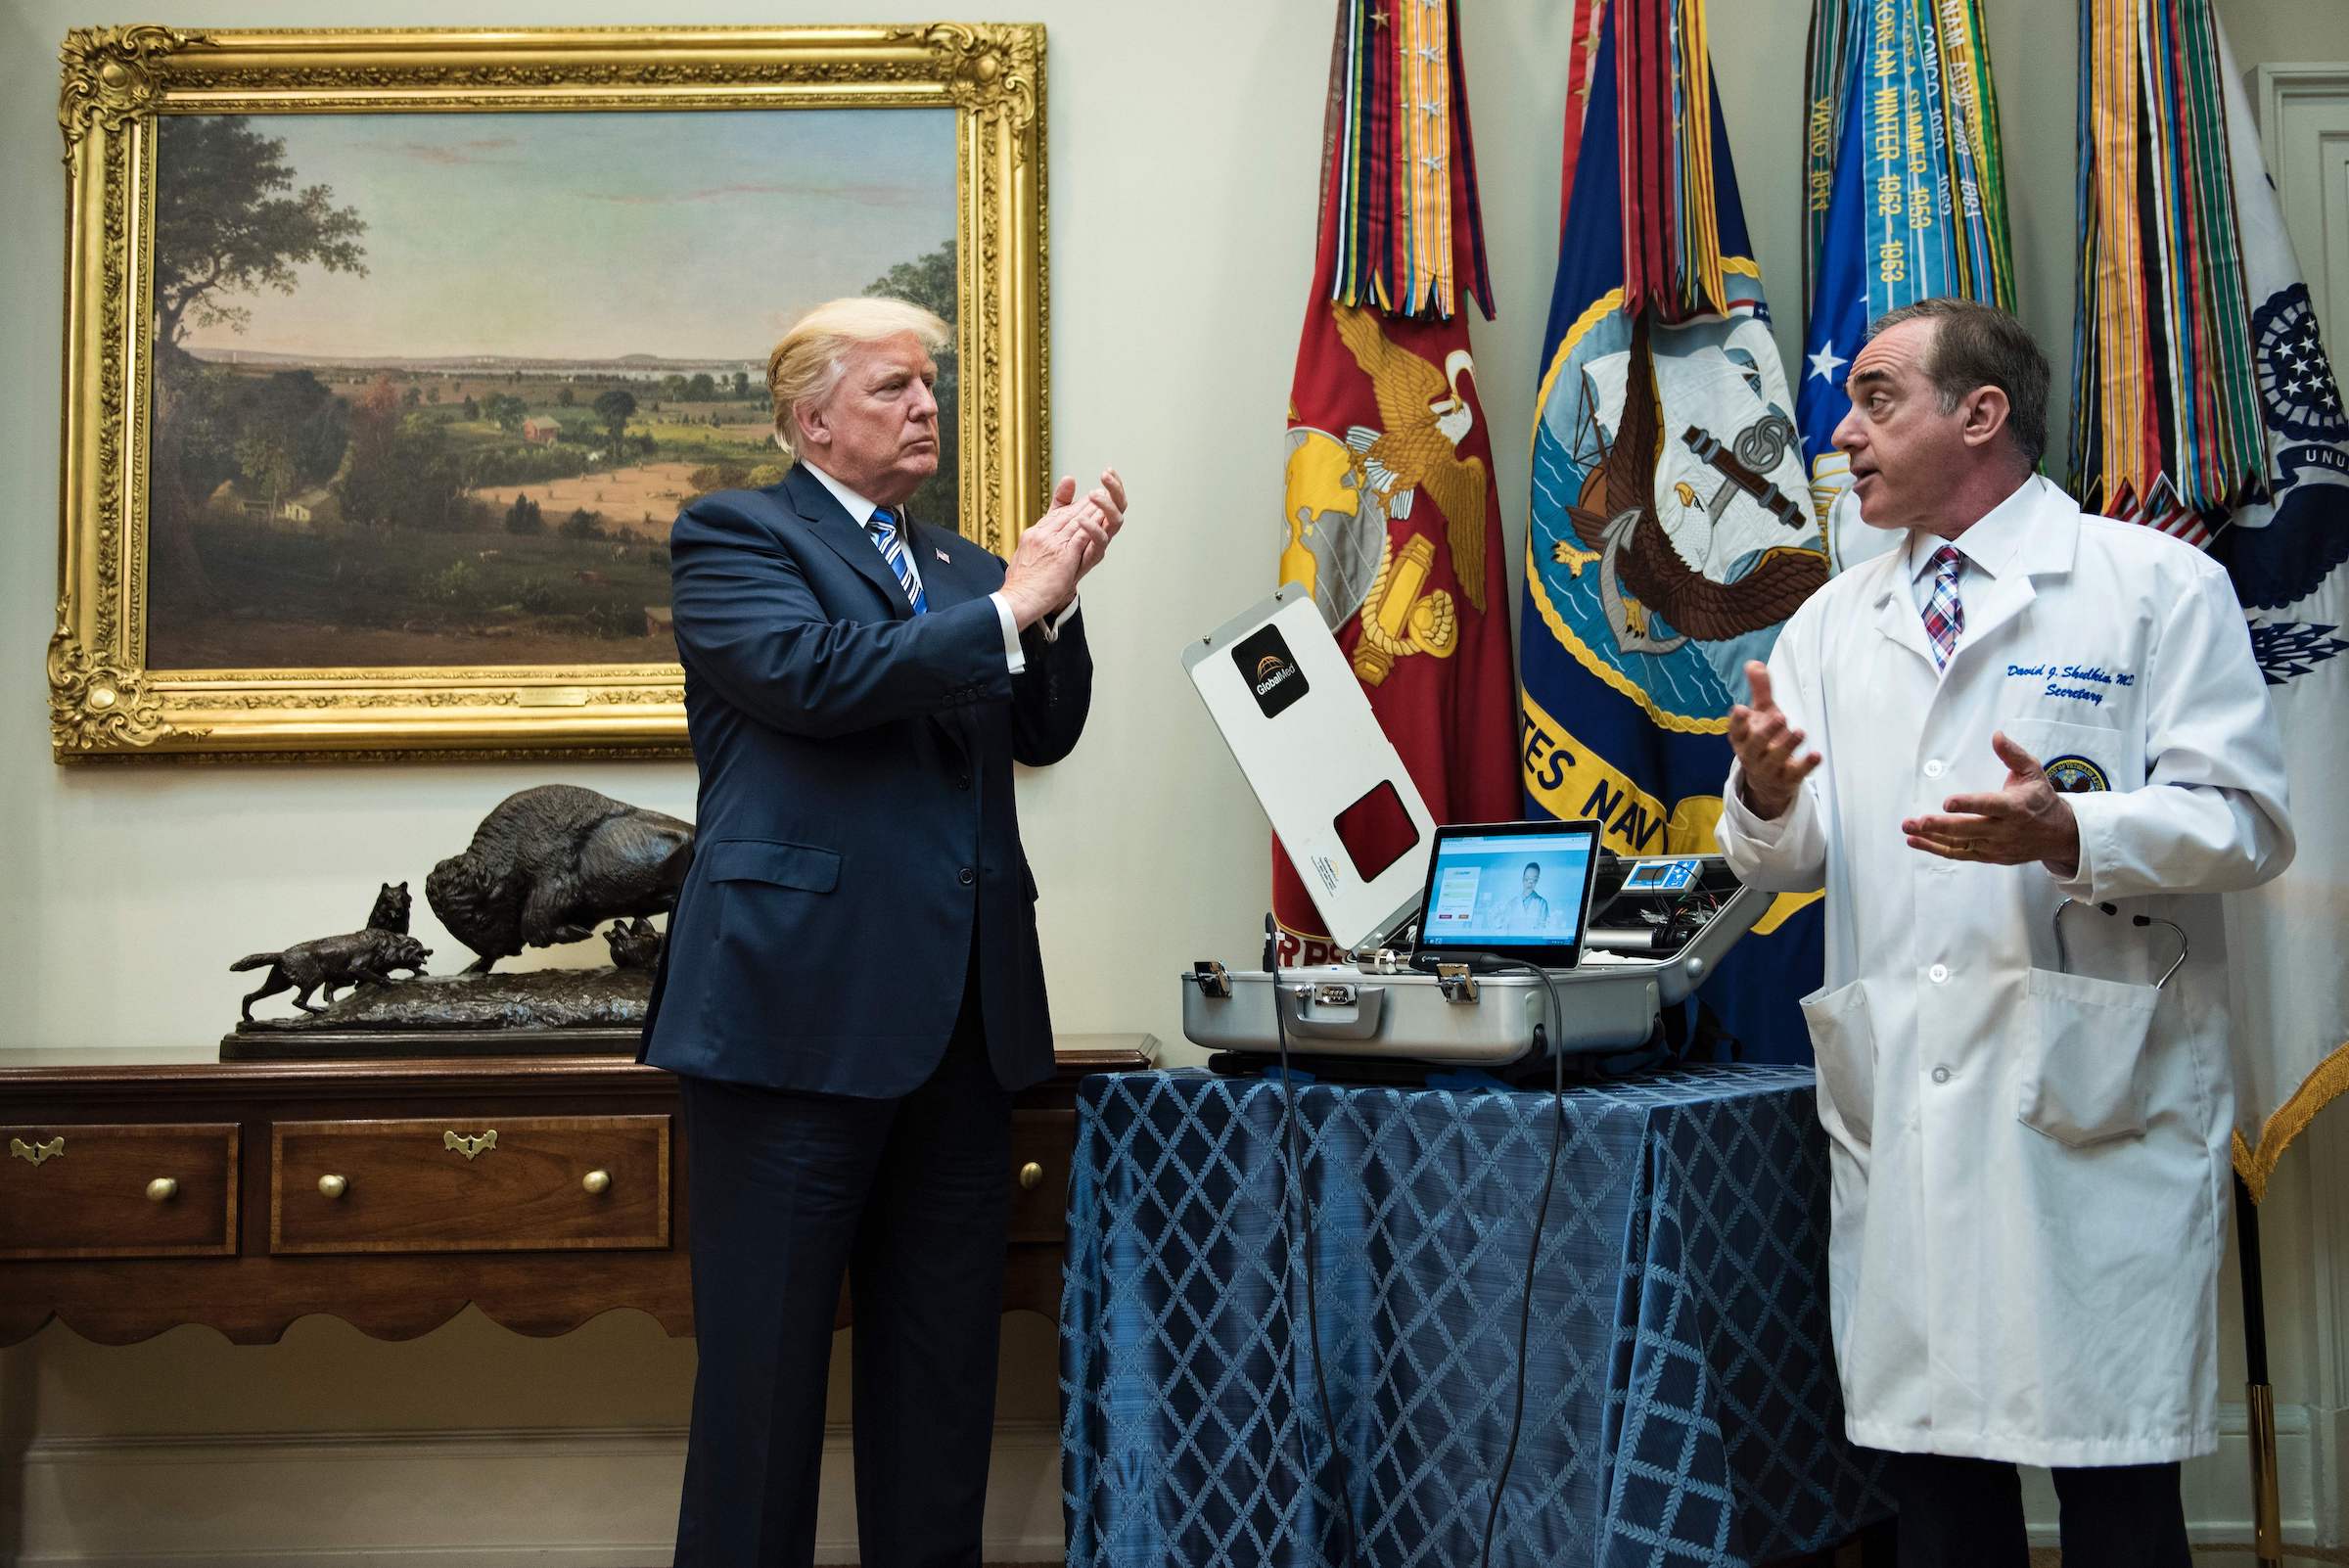 President Donald Trump claps as Secretary of Veterans Affairs David J. Shulkin speaks about new technology used by the Department of Veterans Affairs during an event in the White House on Aug. 3, 2017.